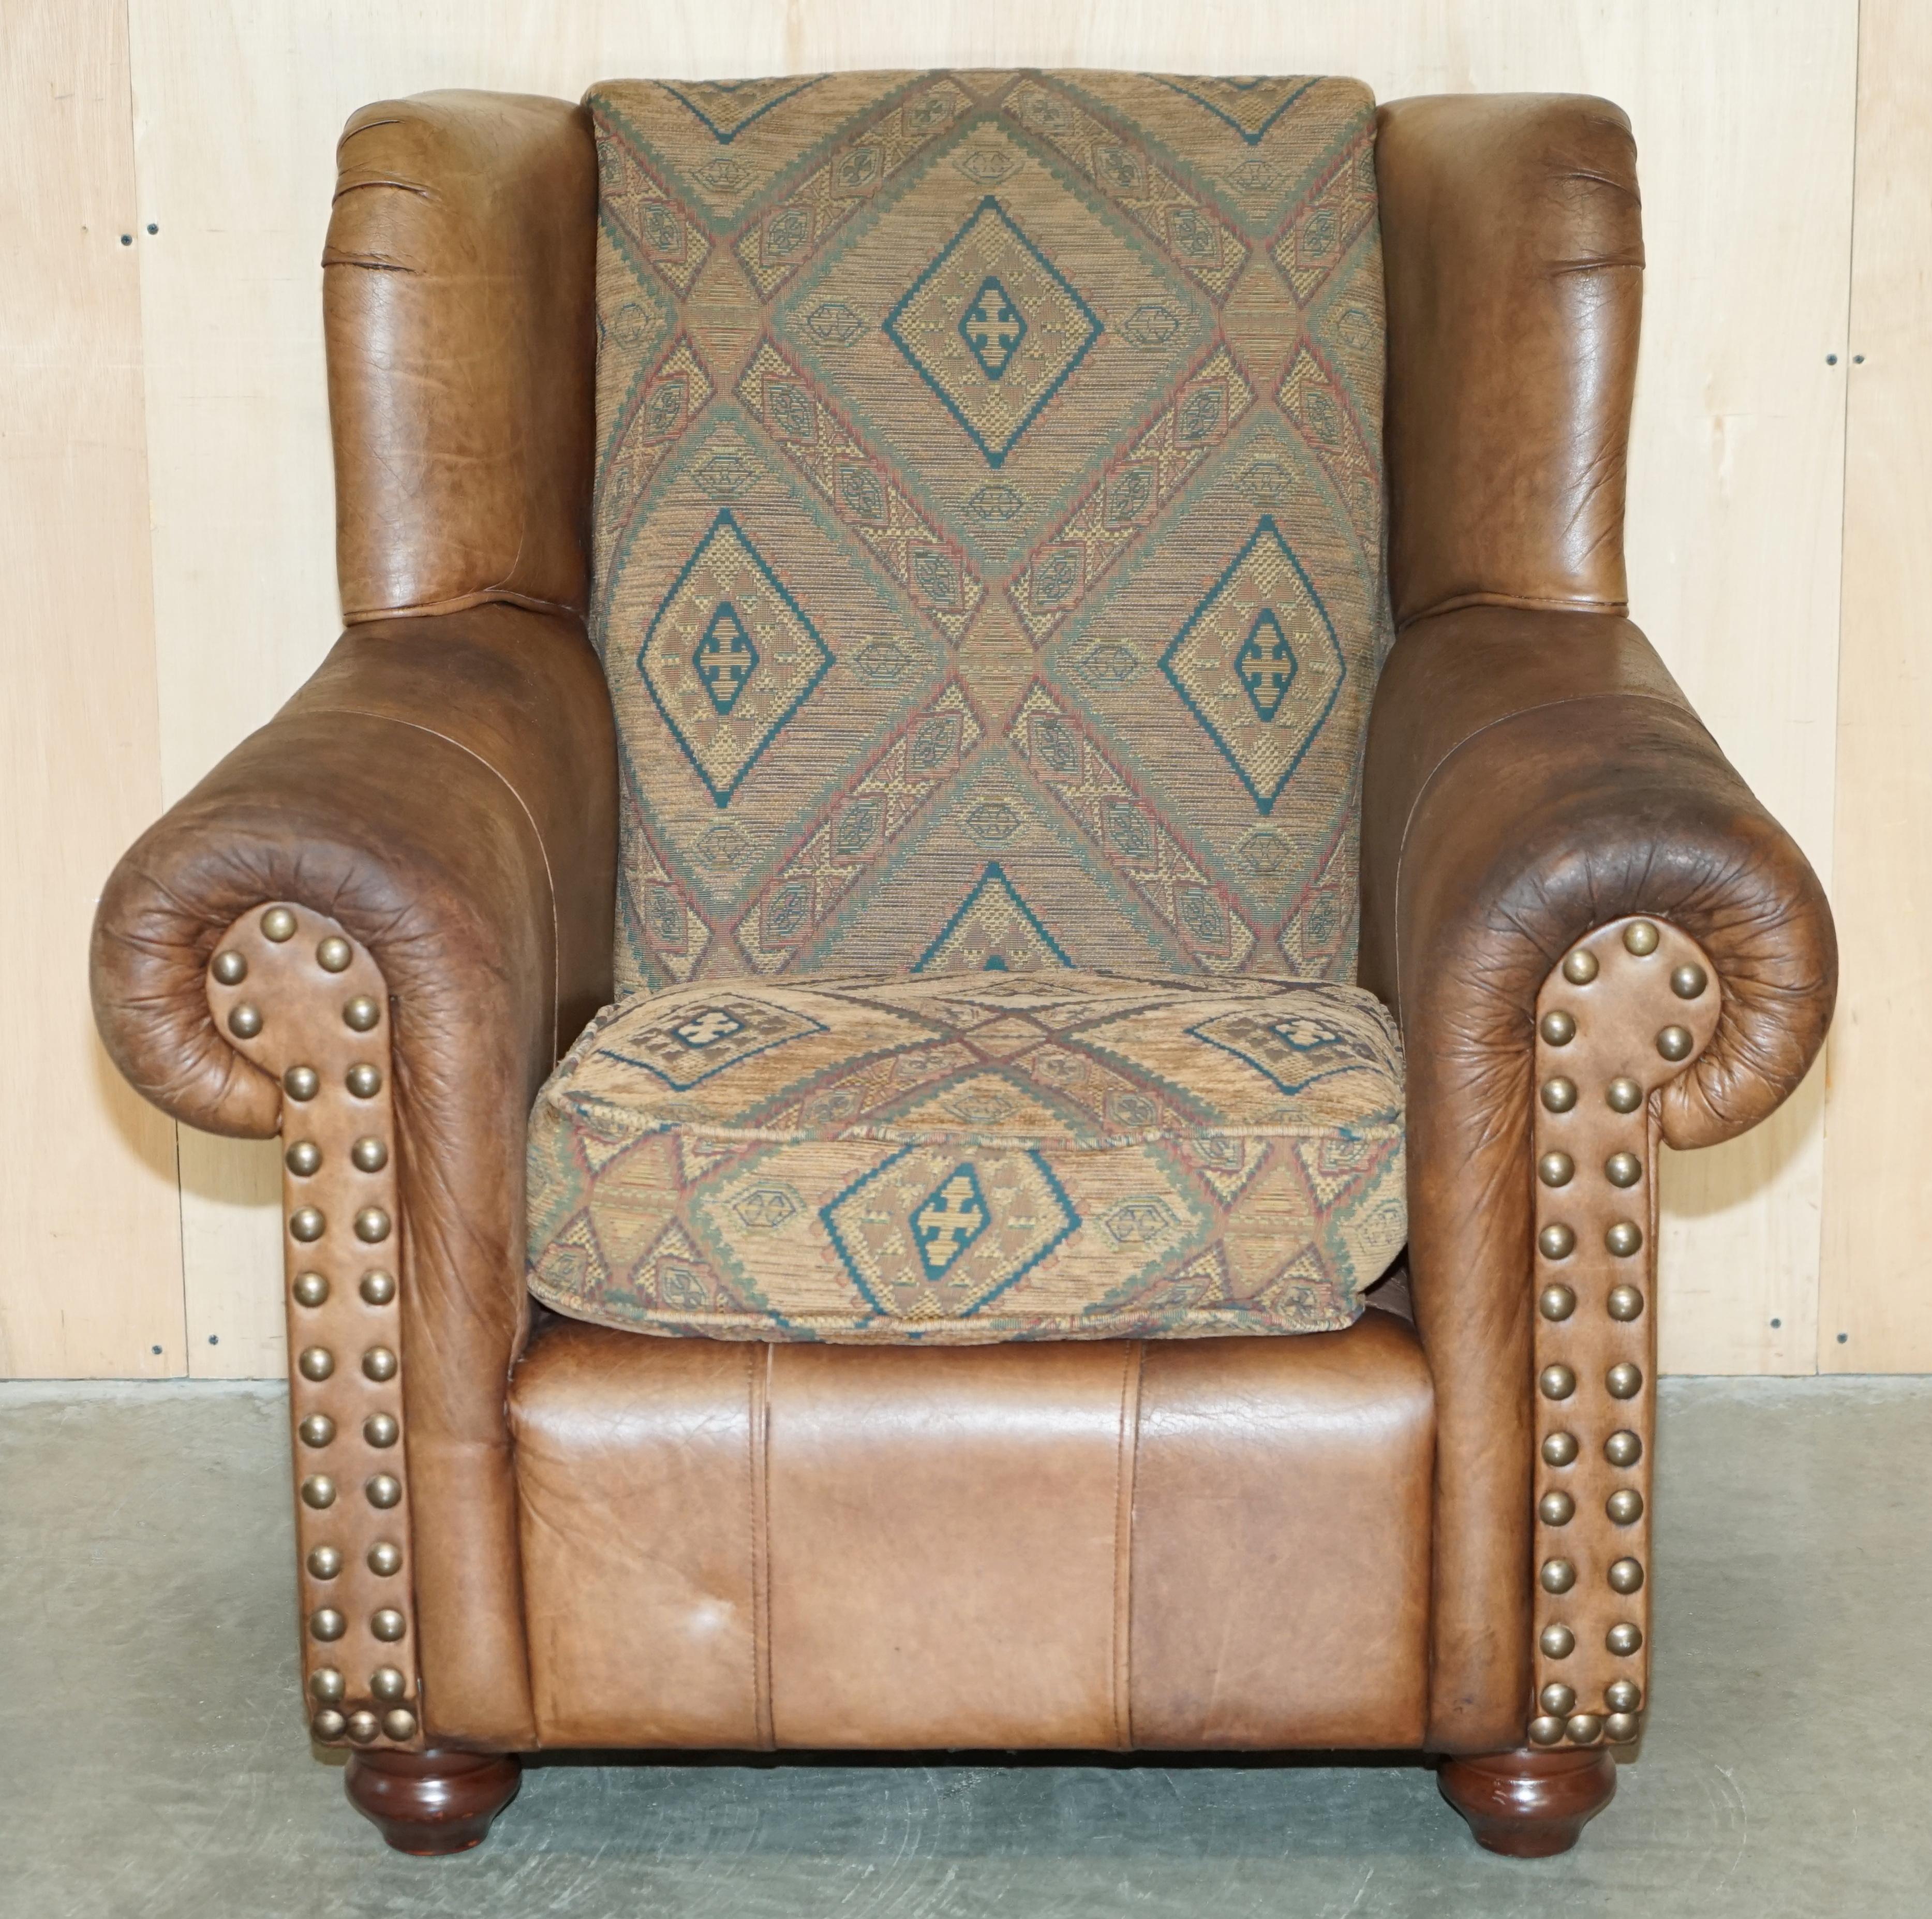 PAIR OF ViNTAGE THOMAS LLOYD BROWN LEATHER KILIM ARMCHAIRS FROM SCOTTISH CASTLe 10